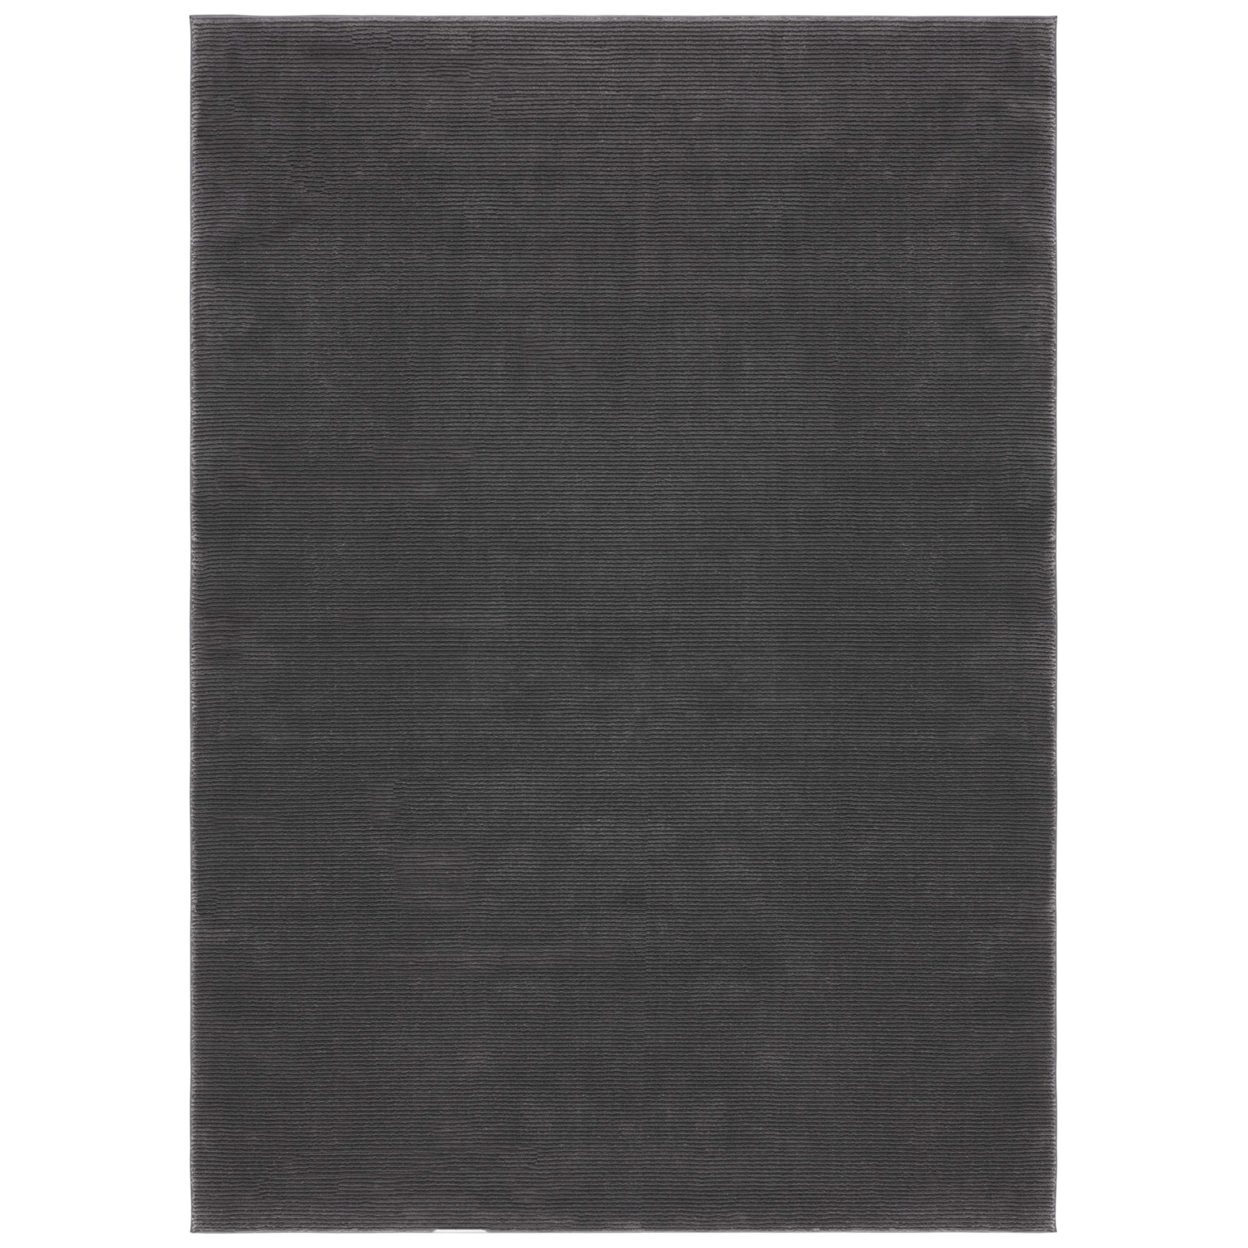 SAFAVIEH REV102H Revive Charcoal - Taupe, 4' X 6' Rectangle